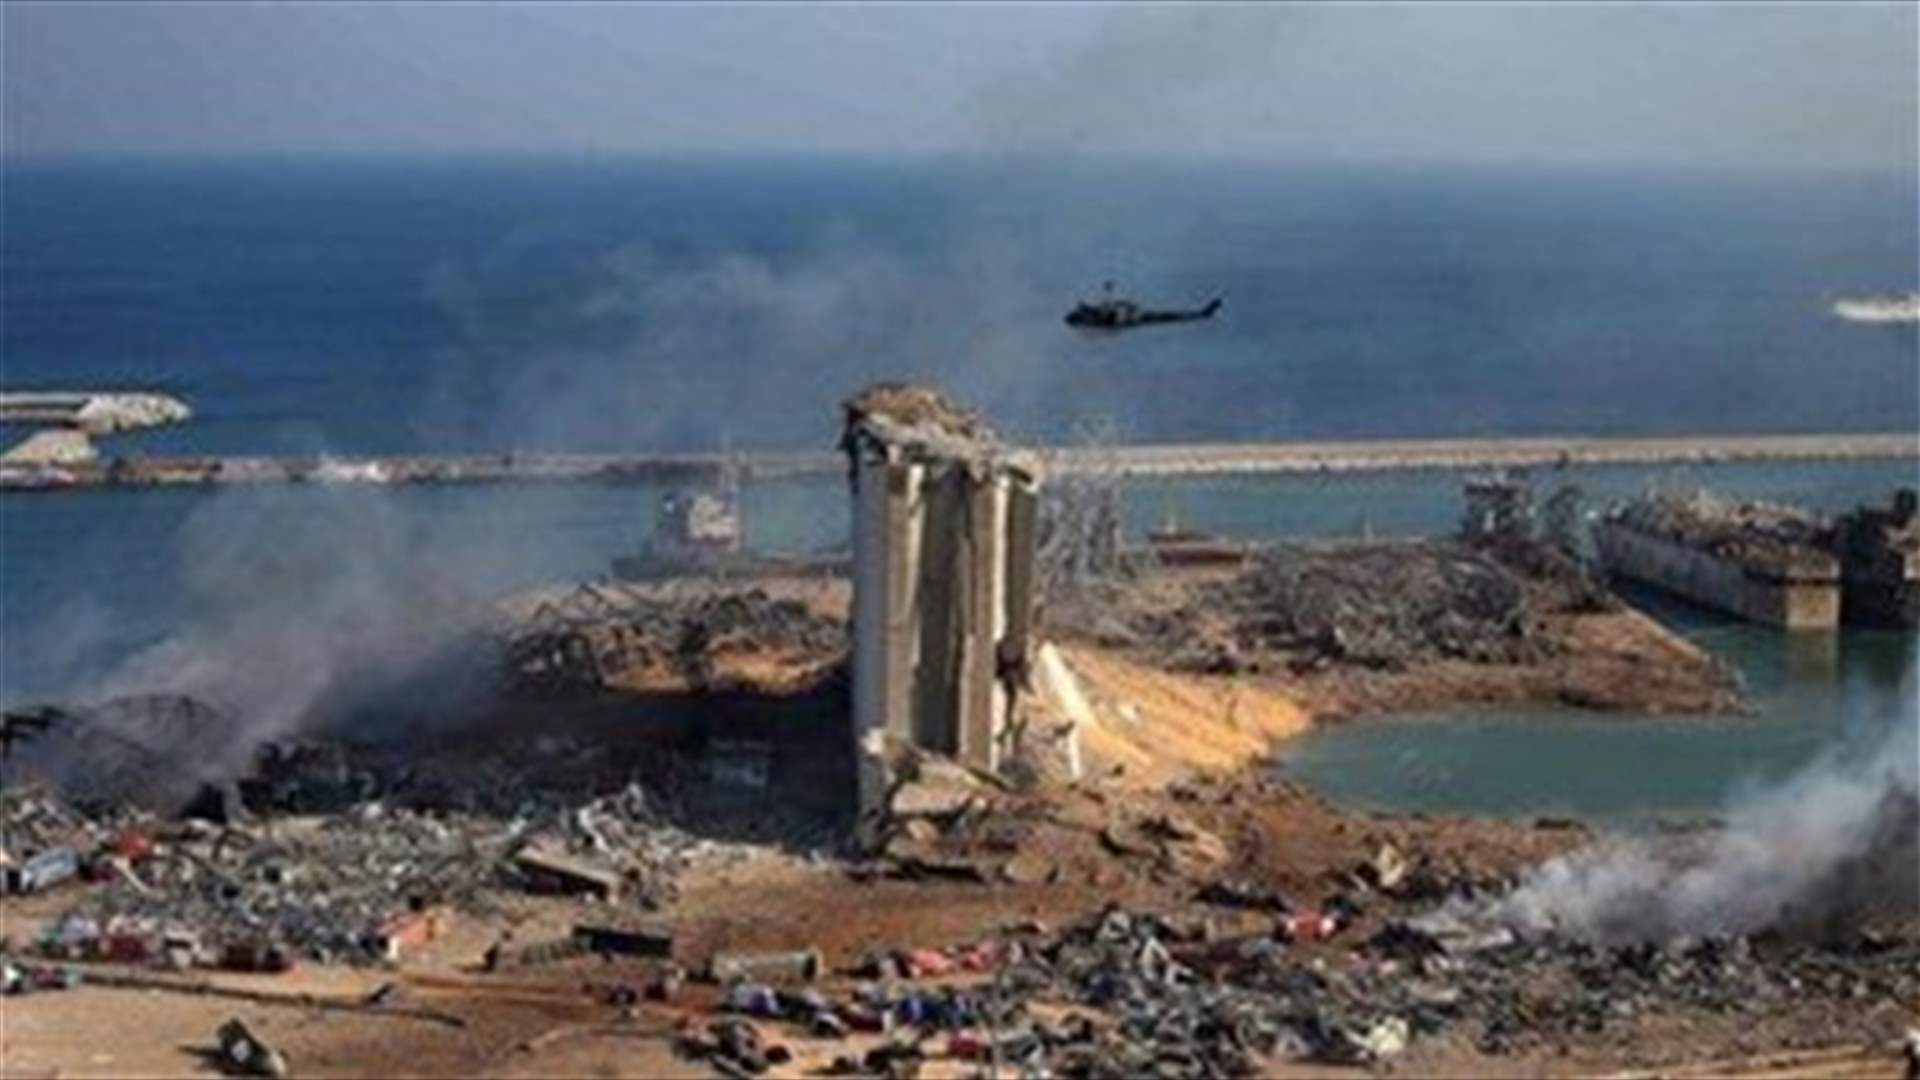 Investigations into Beirut port blast: The latest